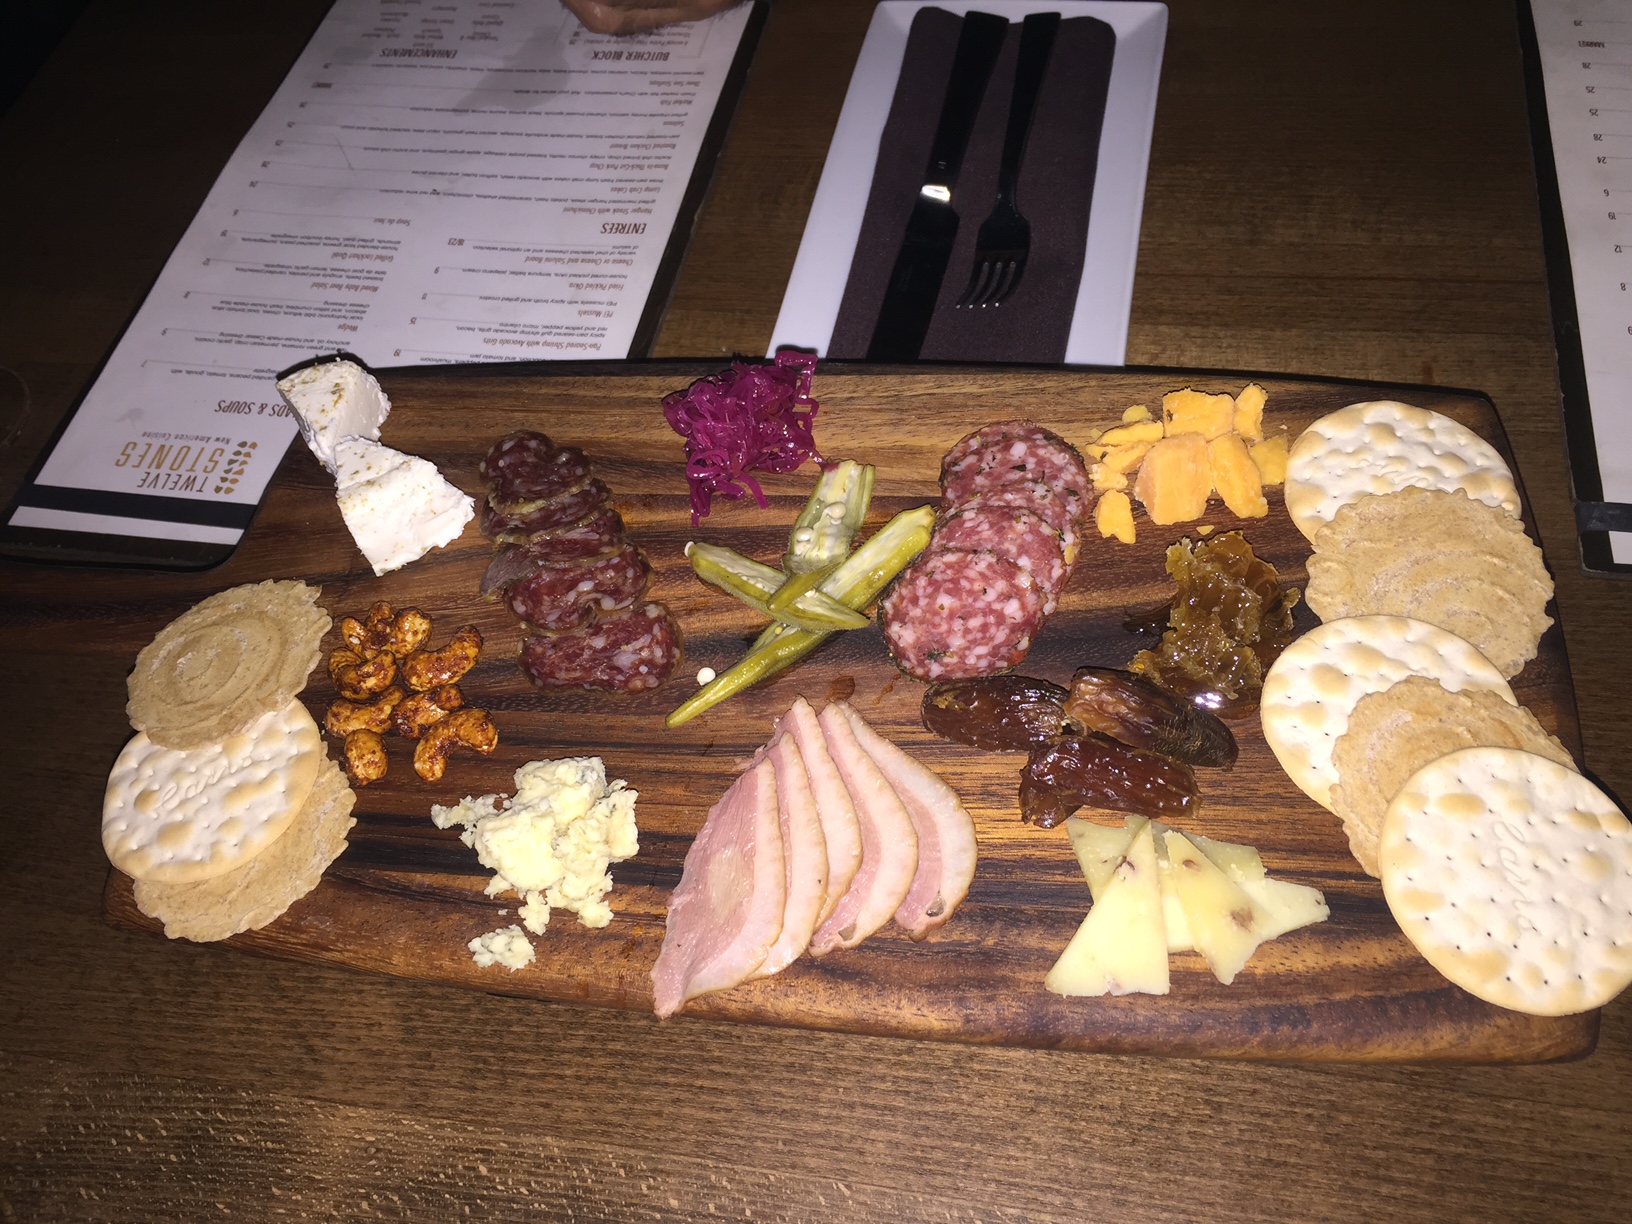 cheeseboard and meats at 12 stones via dallasfoodnerd.com